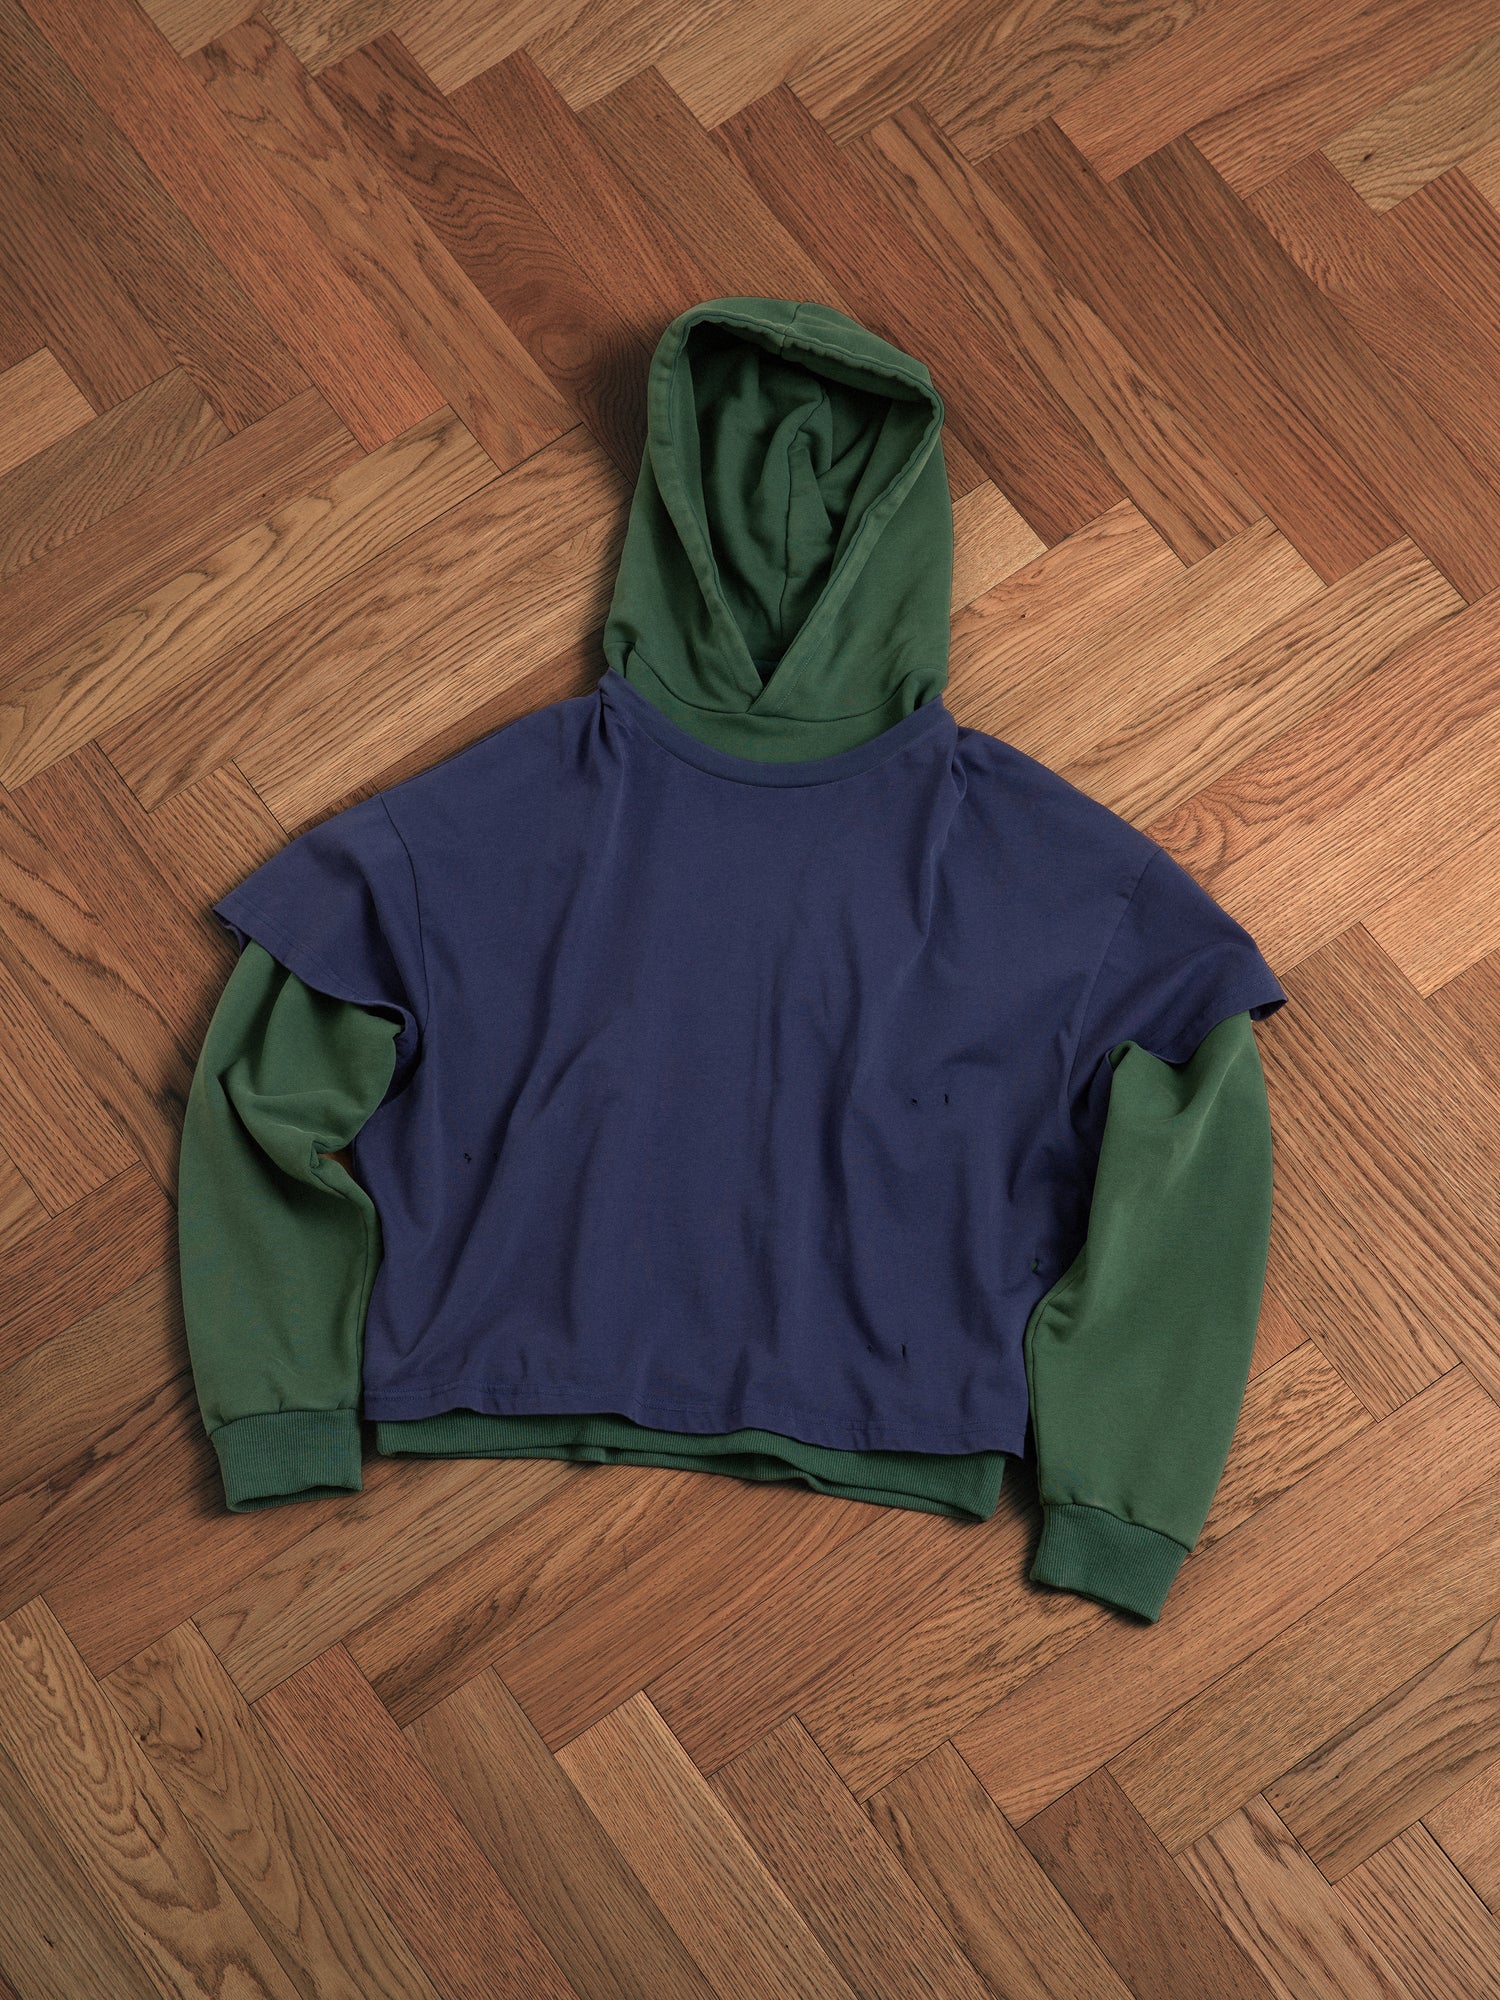 A blue and green Found double layer hoodie on a hardwood floor.